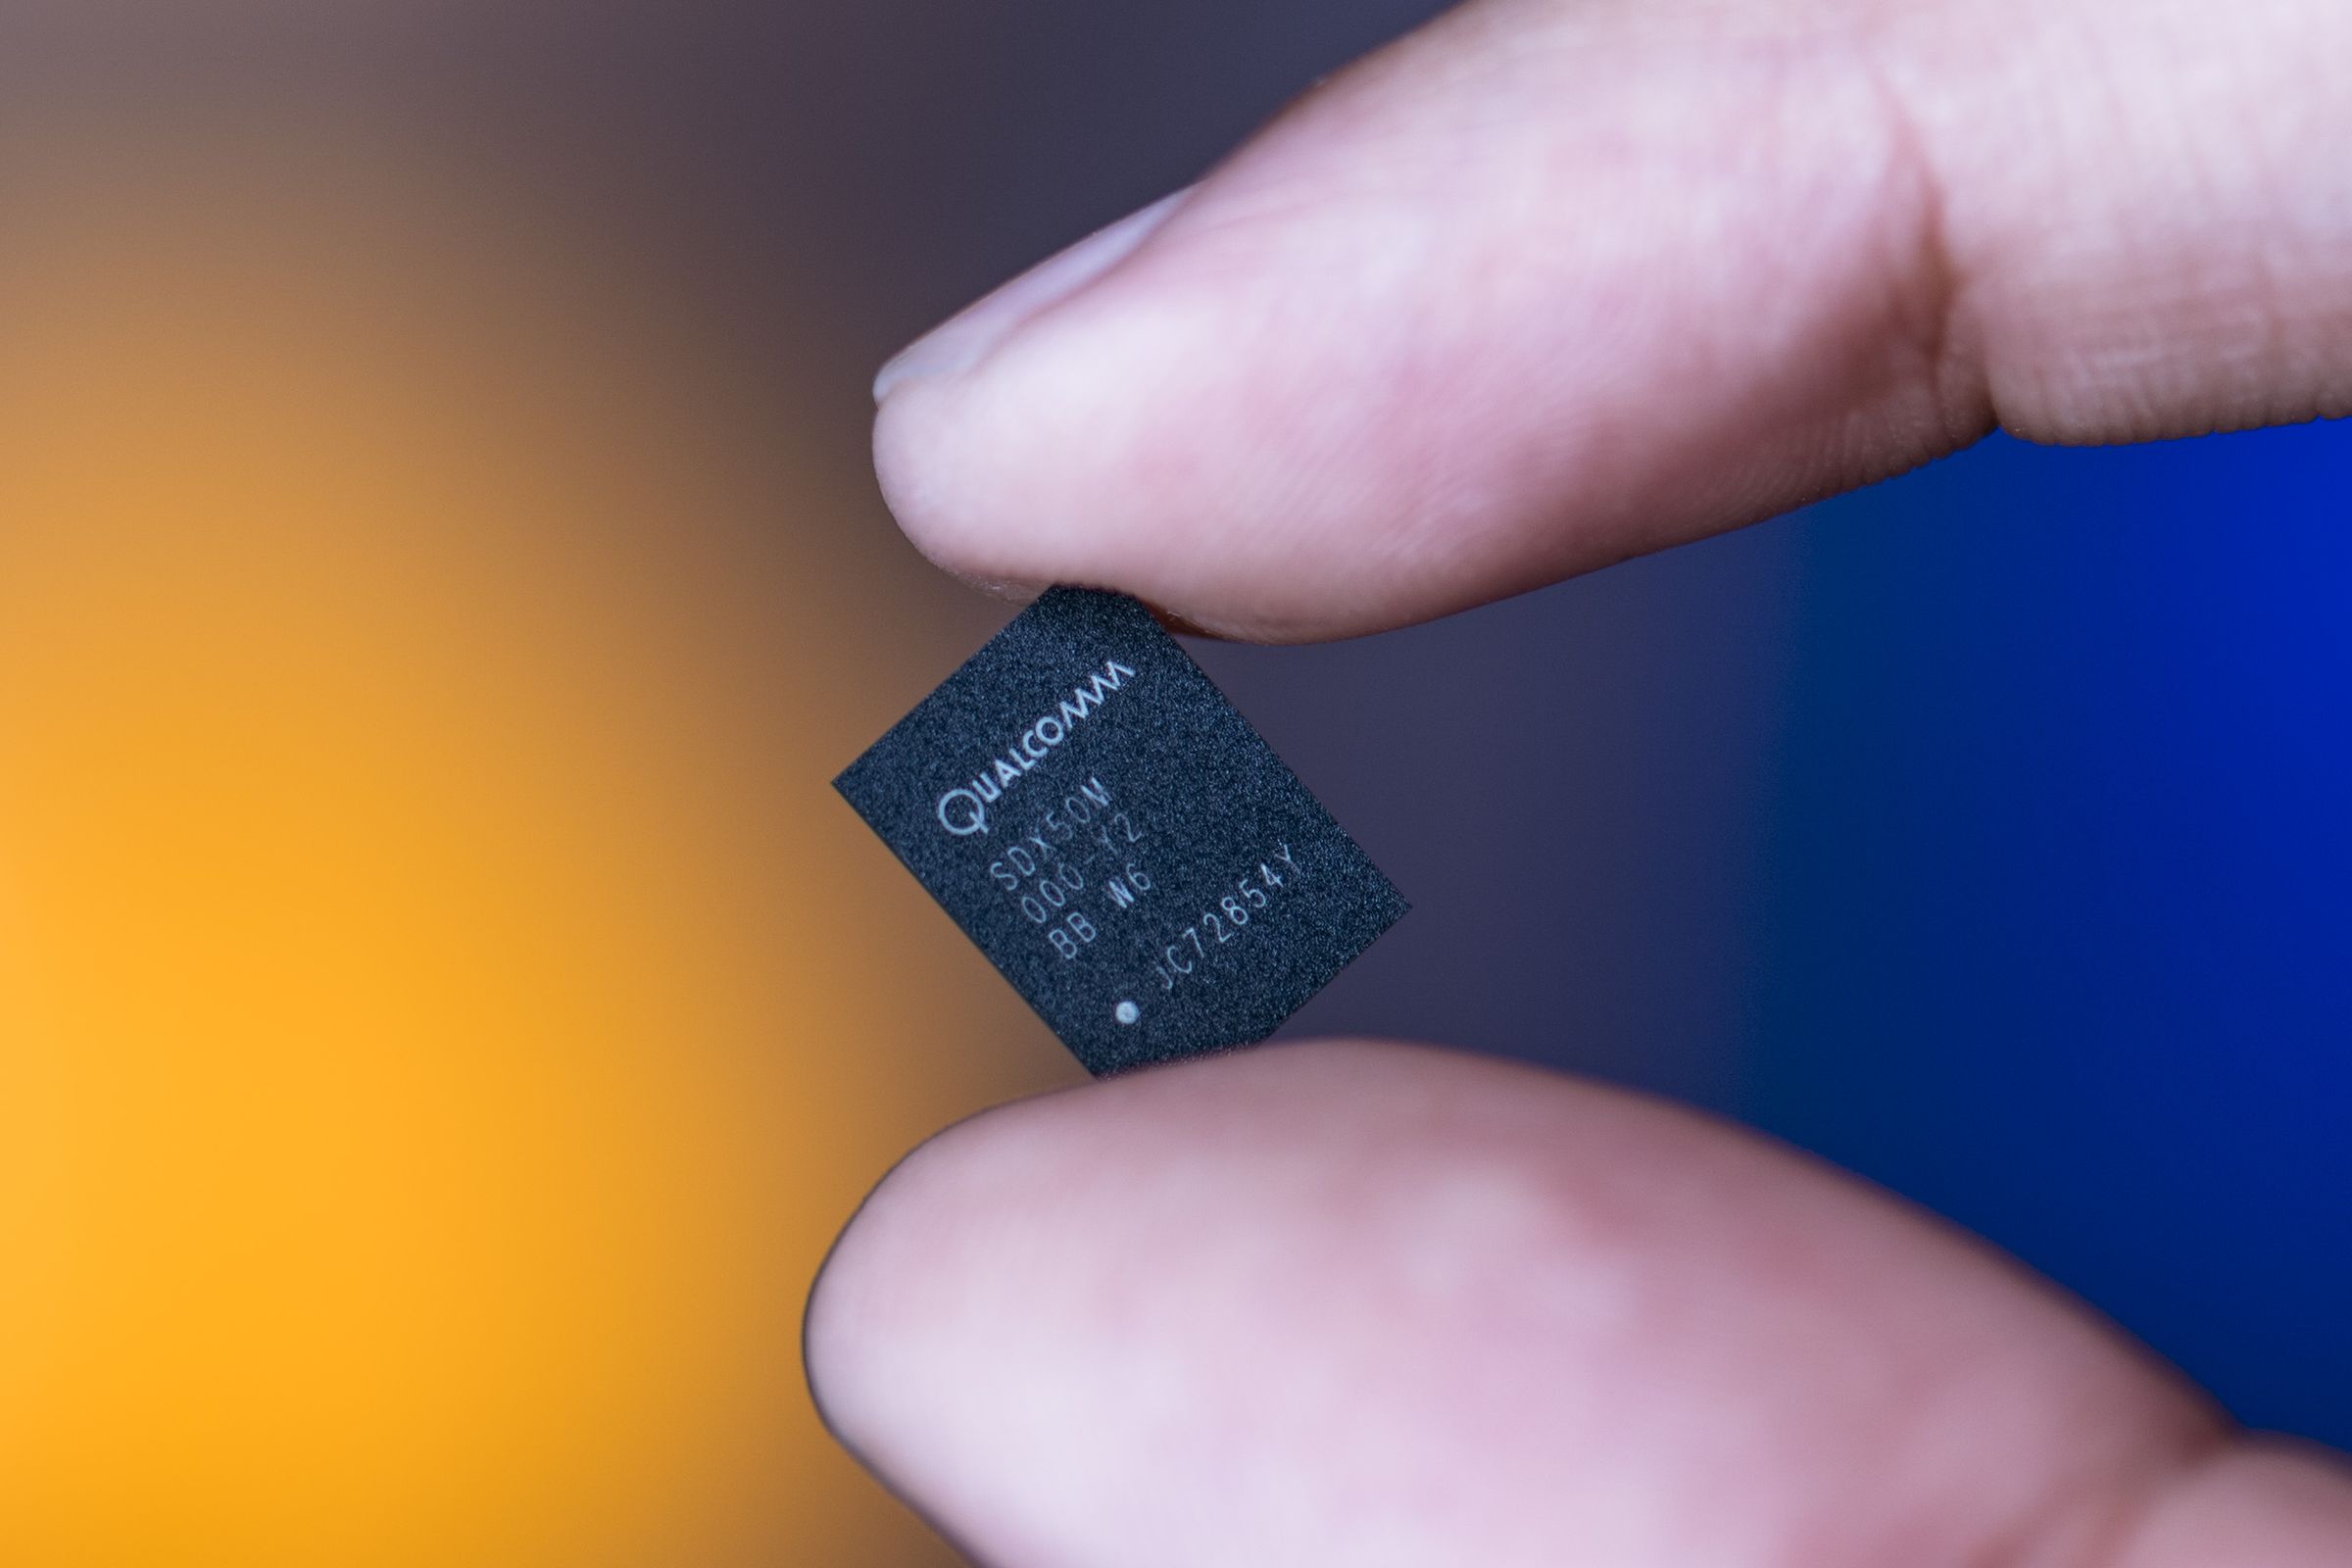 Qualcomm’s X50 5G modem for mobile devices